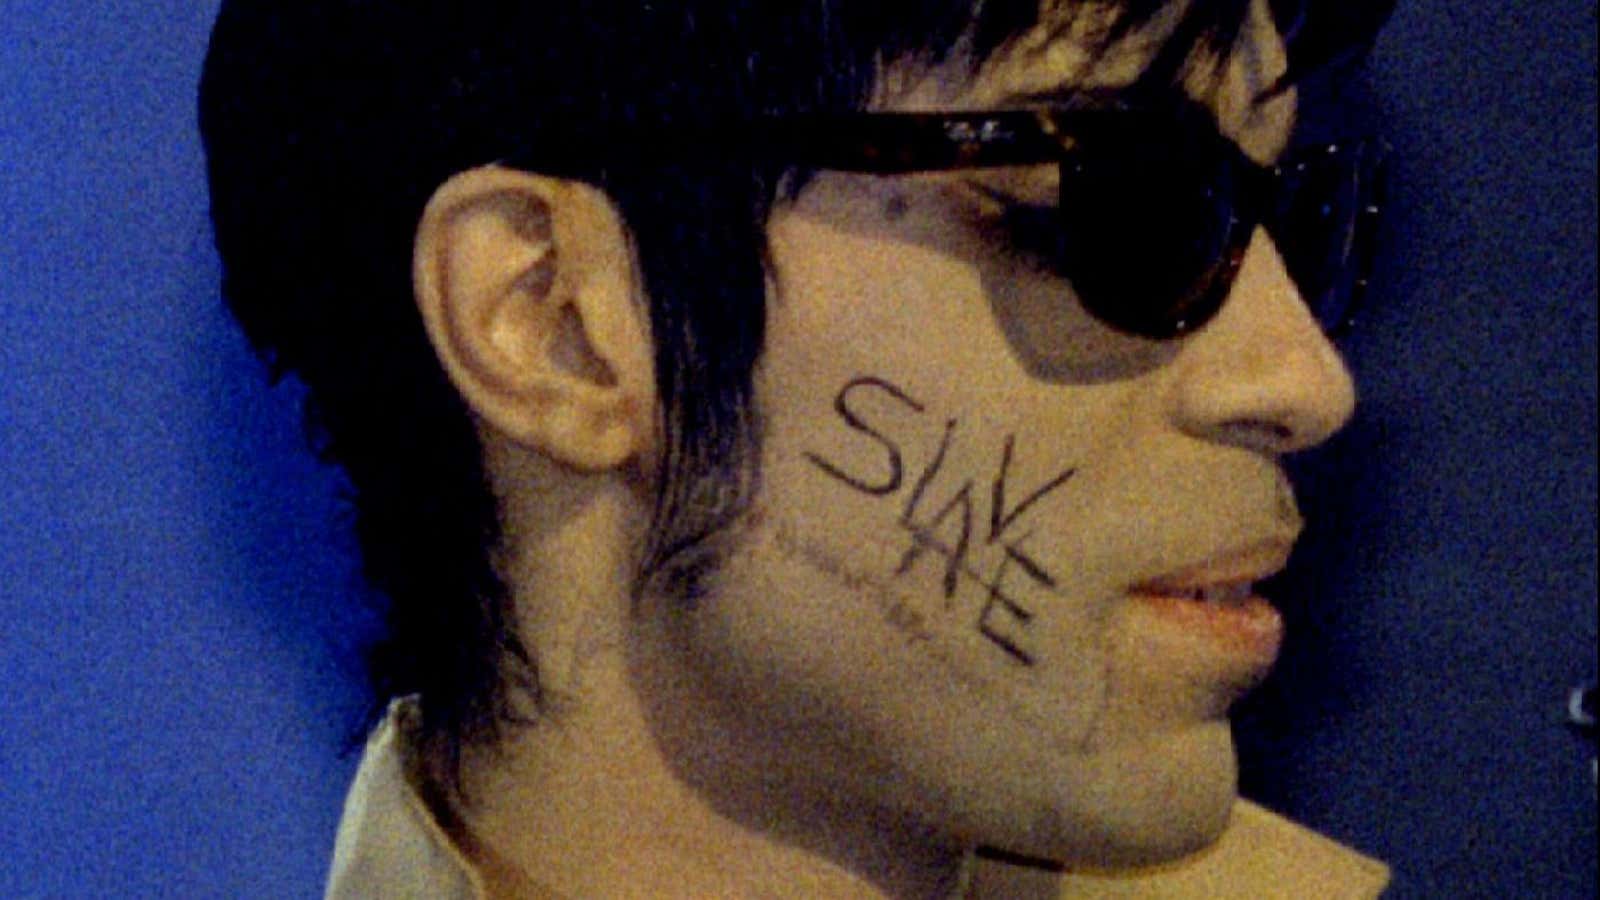 Prince wrote “slave” on his face in 1993 to protest against his record company.